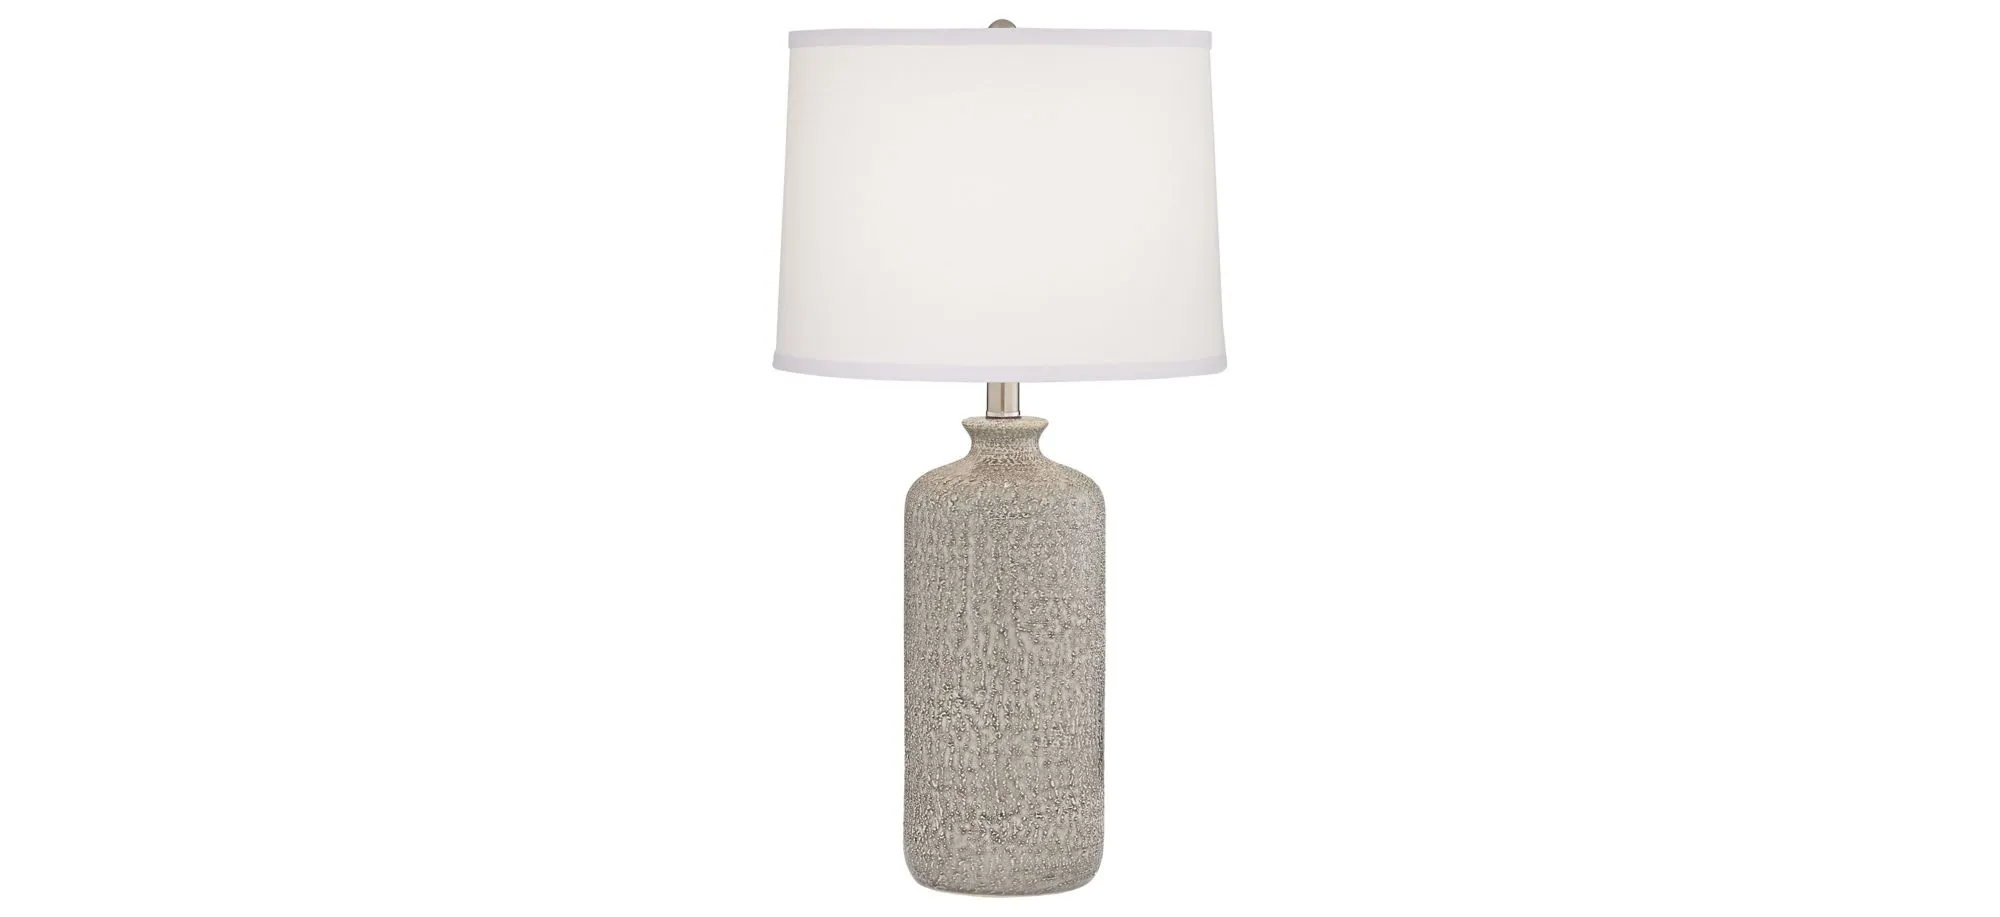 Yorba Table Lamp in Grey by Pacific Coast